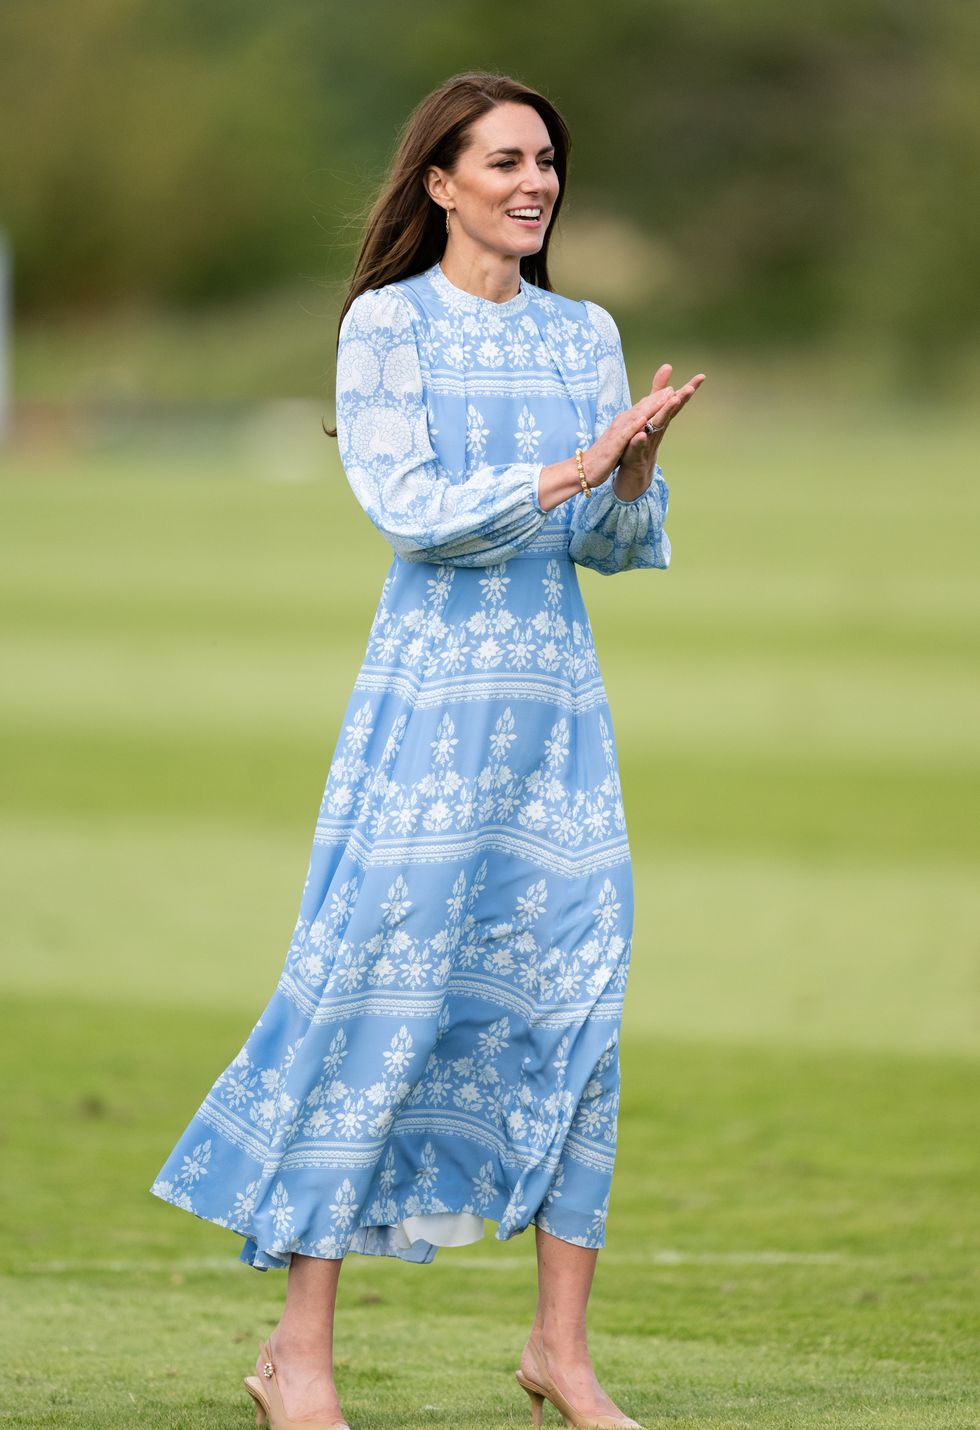 Kate Middleton Looks Beautiful in Blue Summer Dress At The Polo